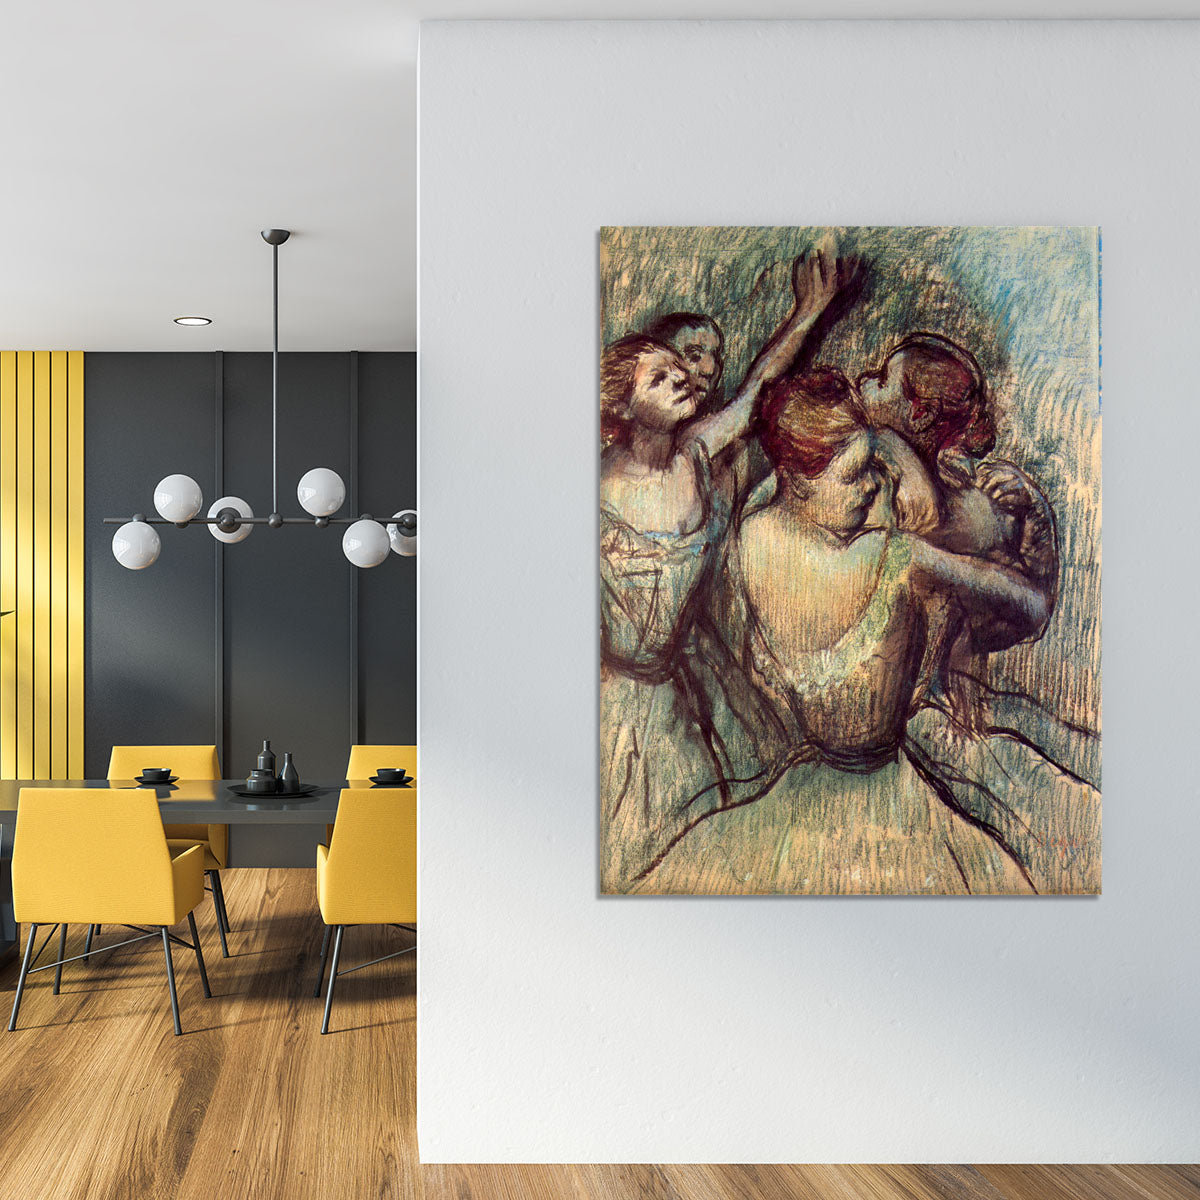 Four dancers in half figure by Degas Canvas Print or Poster - Canvas Art Rocks - 4